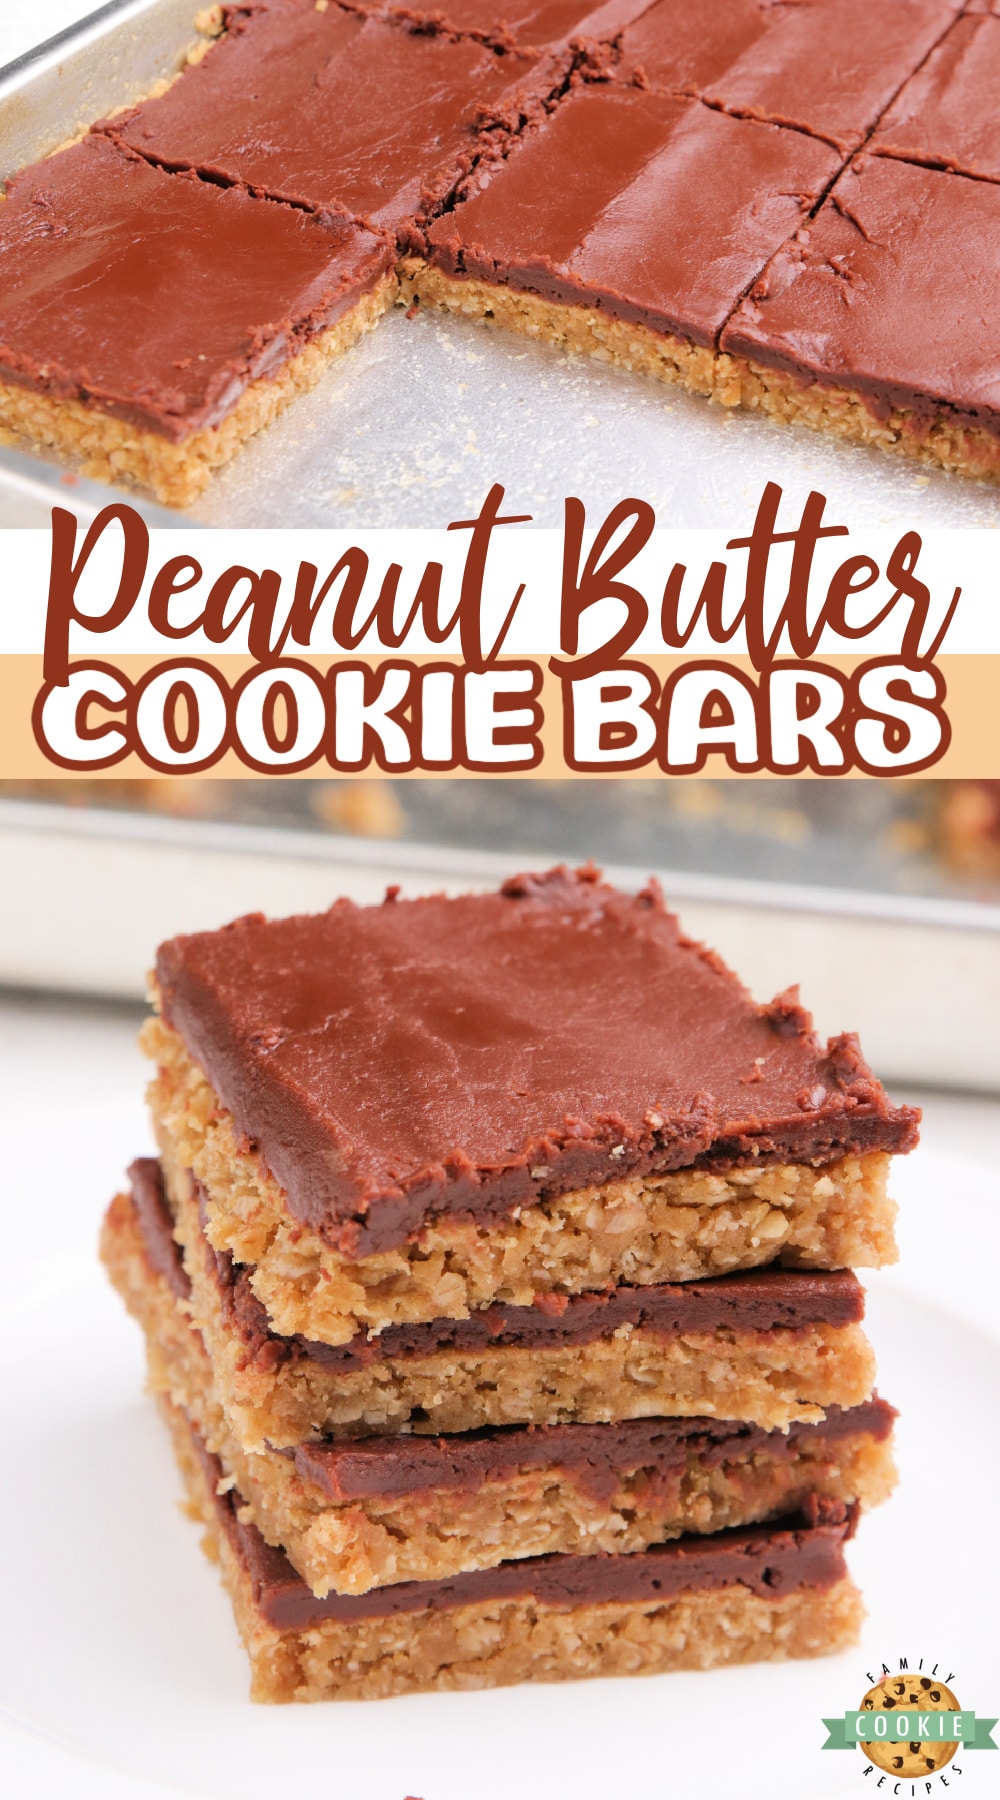 Peanut Butter Cookie Bars are soft and chewy with a chocolate fudge frosting on top. Delicious cookie bar recipe made with peanut butter, oats and a simple chocolate ganache for the frosting! via @buttergirls